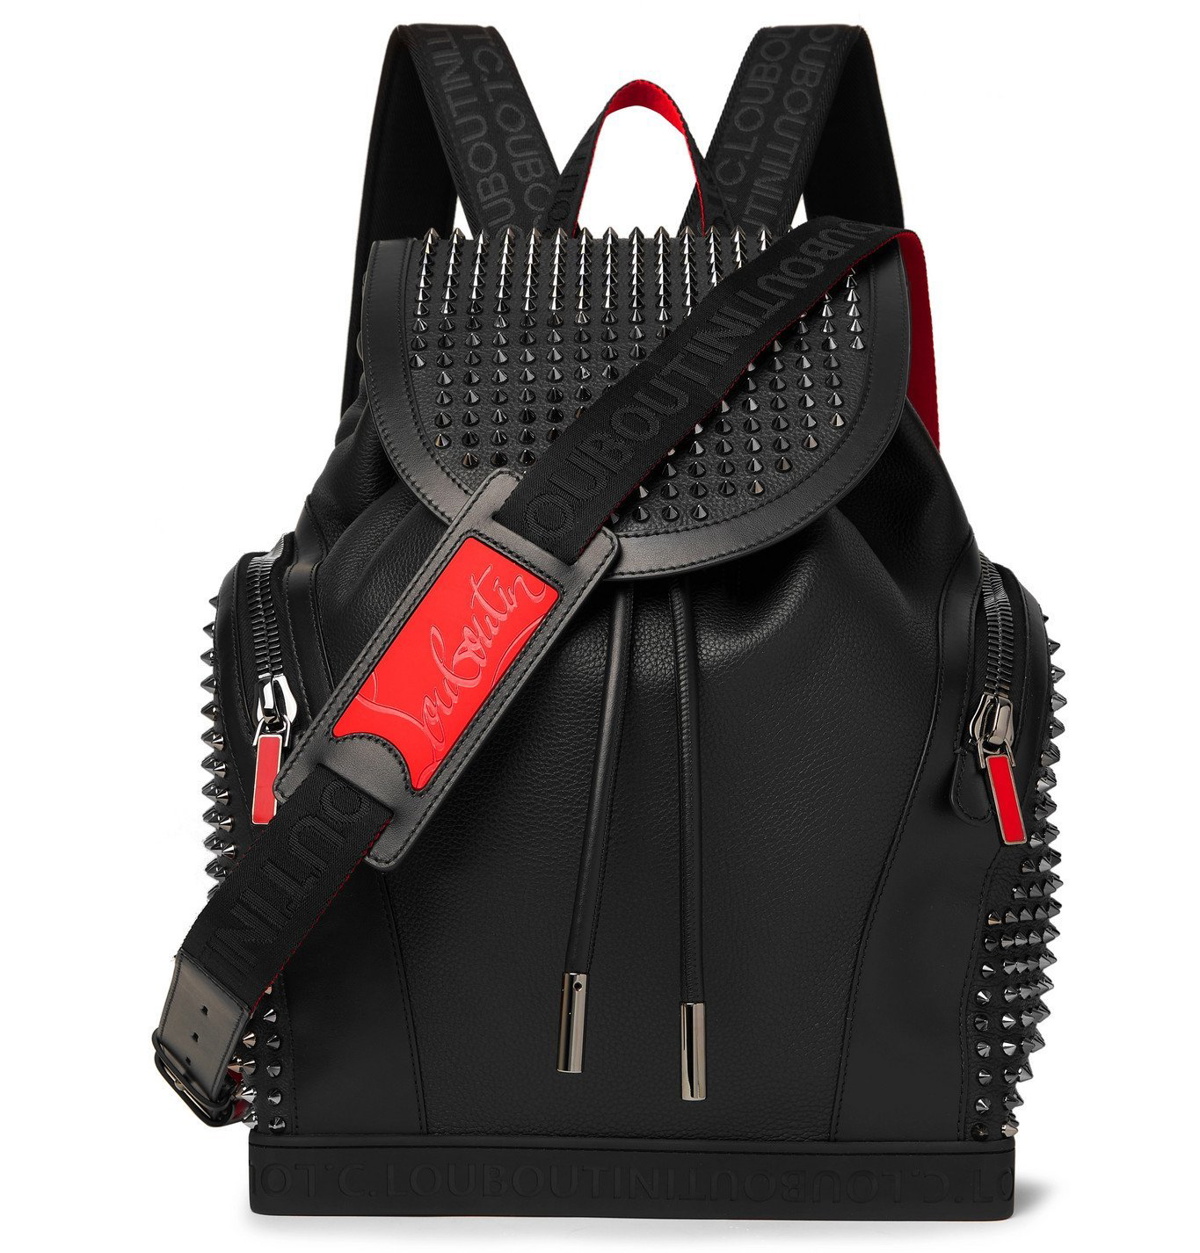 Christian Louboutin Loubifunk Spiked Leather Backpack in Black for